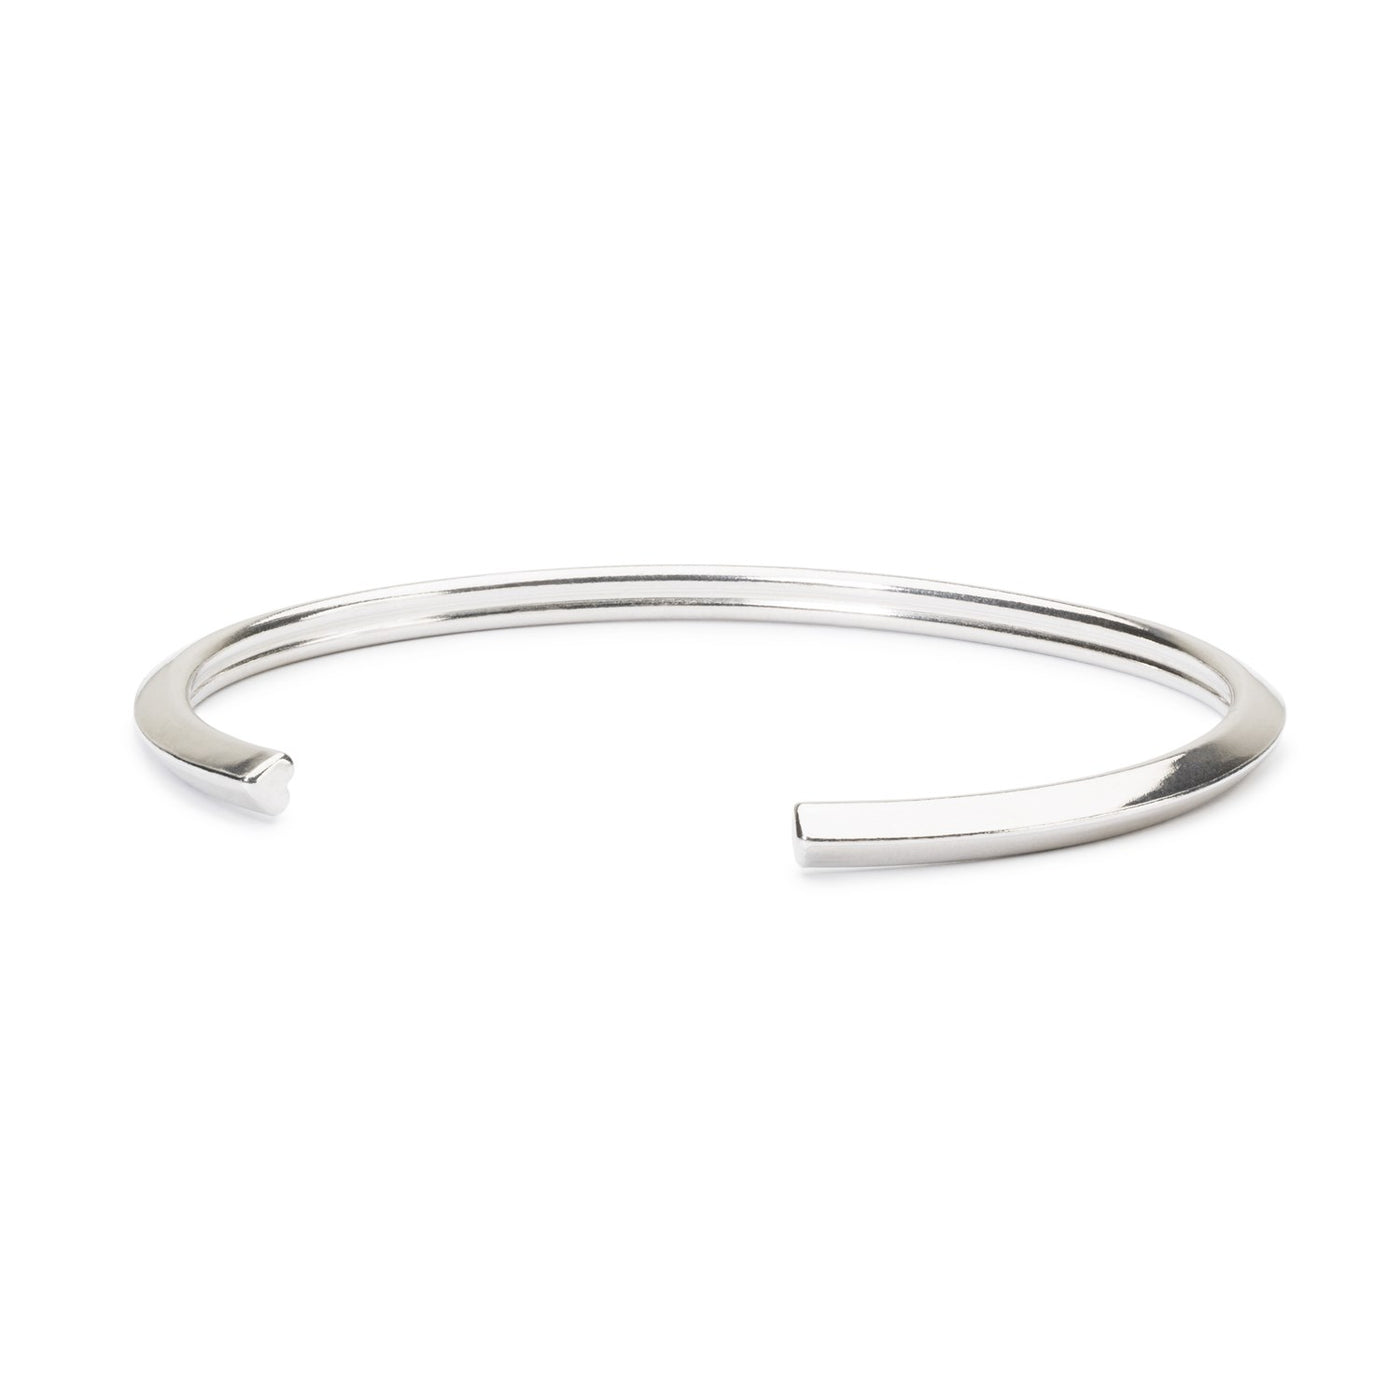 Heart Bangle with 2 x Silver Spacers